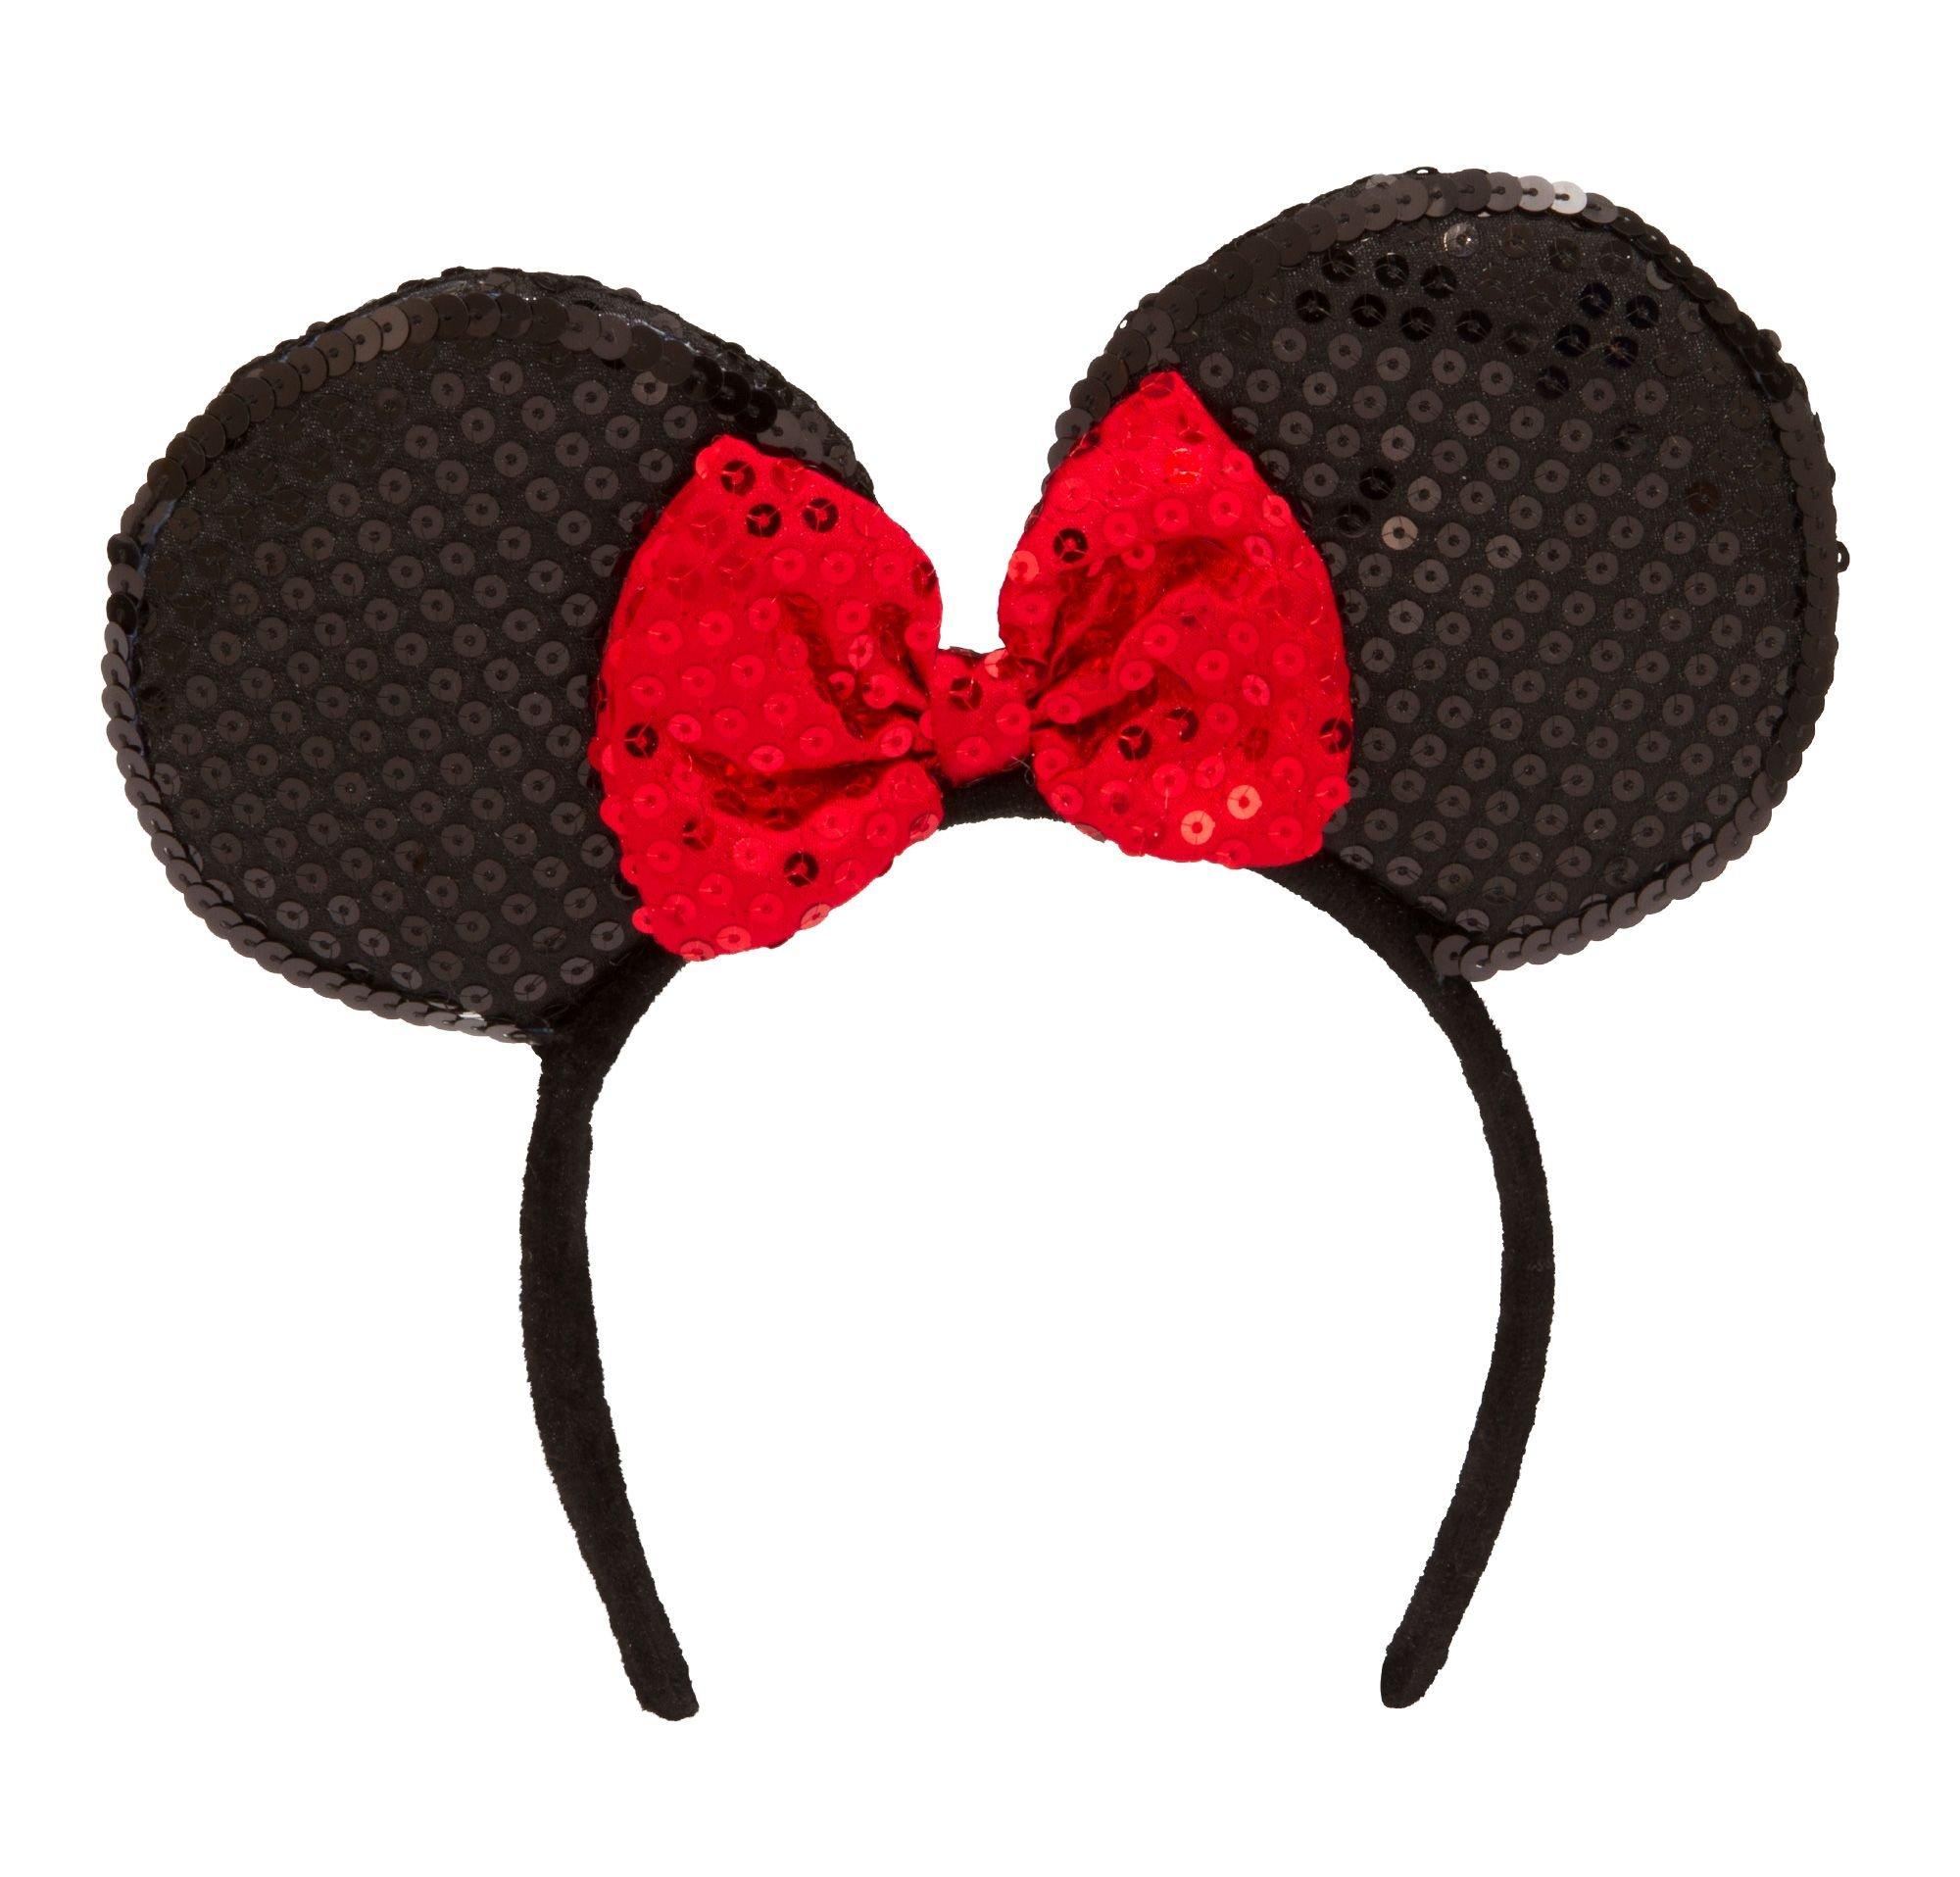 FANYITY Mouse Costume Ears,2 Pcs Mouse Ears Headbands for Girls & Women  Party,Size Free (Red Bow Points)